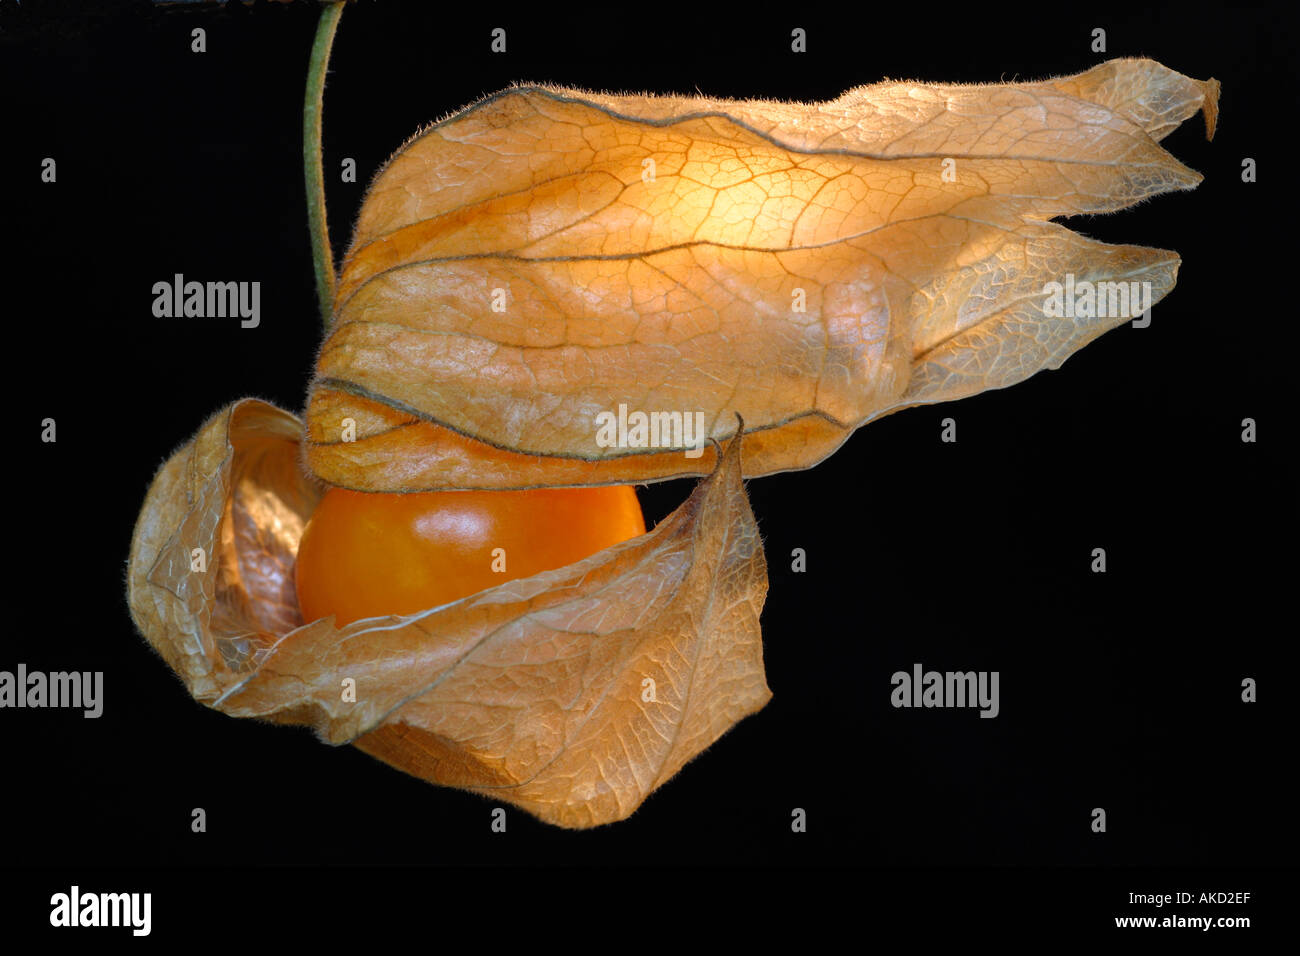 Genus Solanaceae. Physalis known as a Cape Gooseberry with glowing orange, decorative husk looking like a  flowing scarf Stock Photo